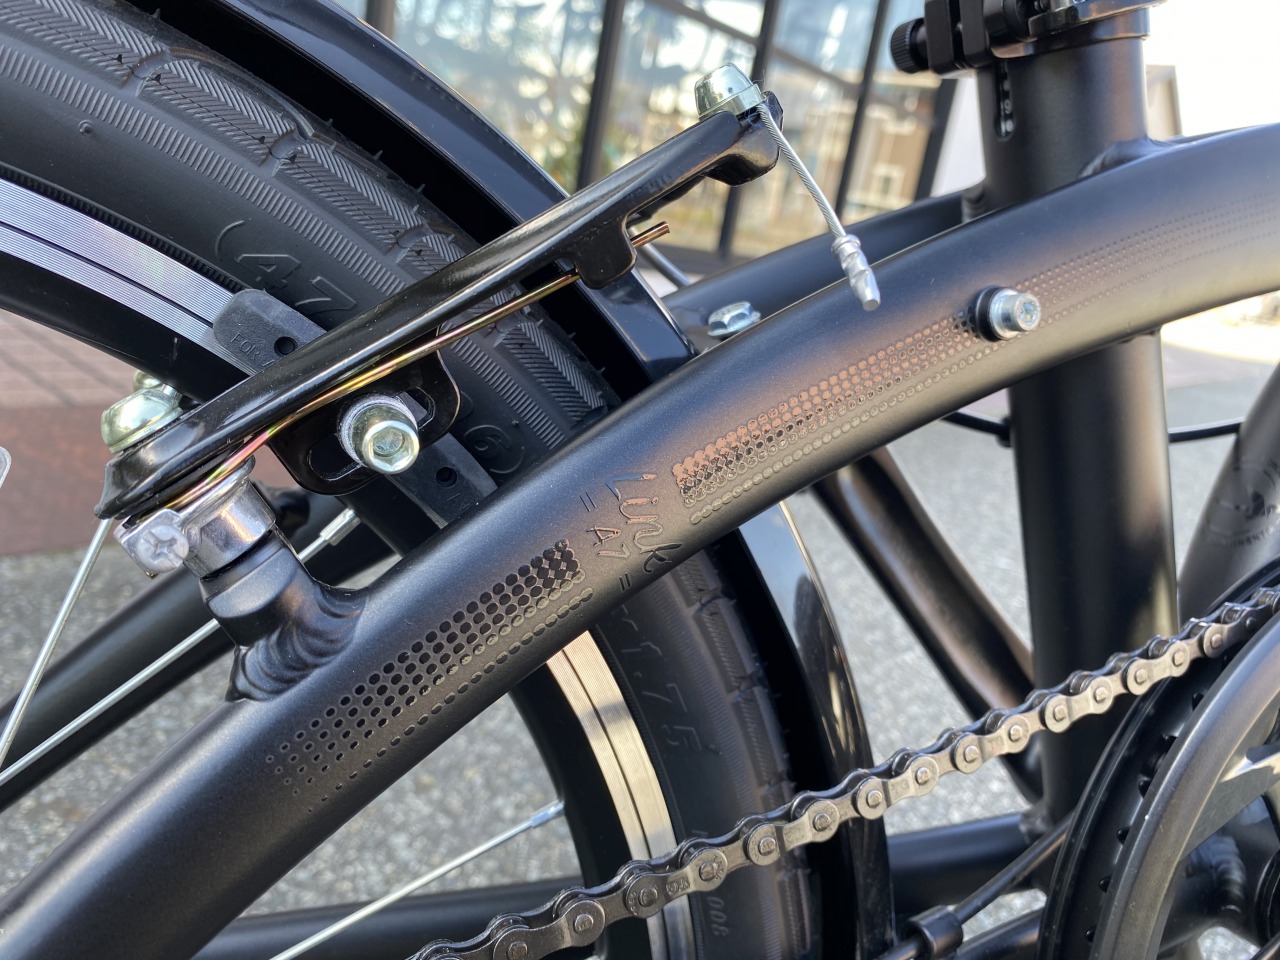 Tern Link A7 納車…from Yさま！ - Climb cycle sports